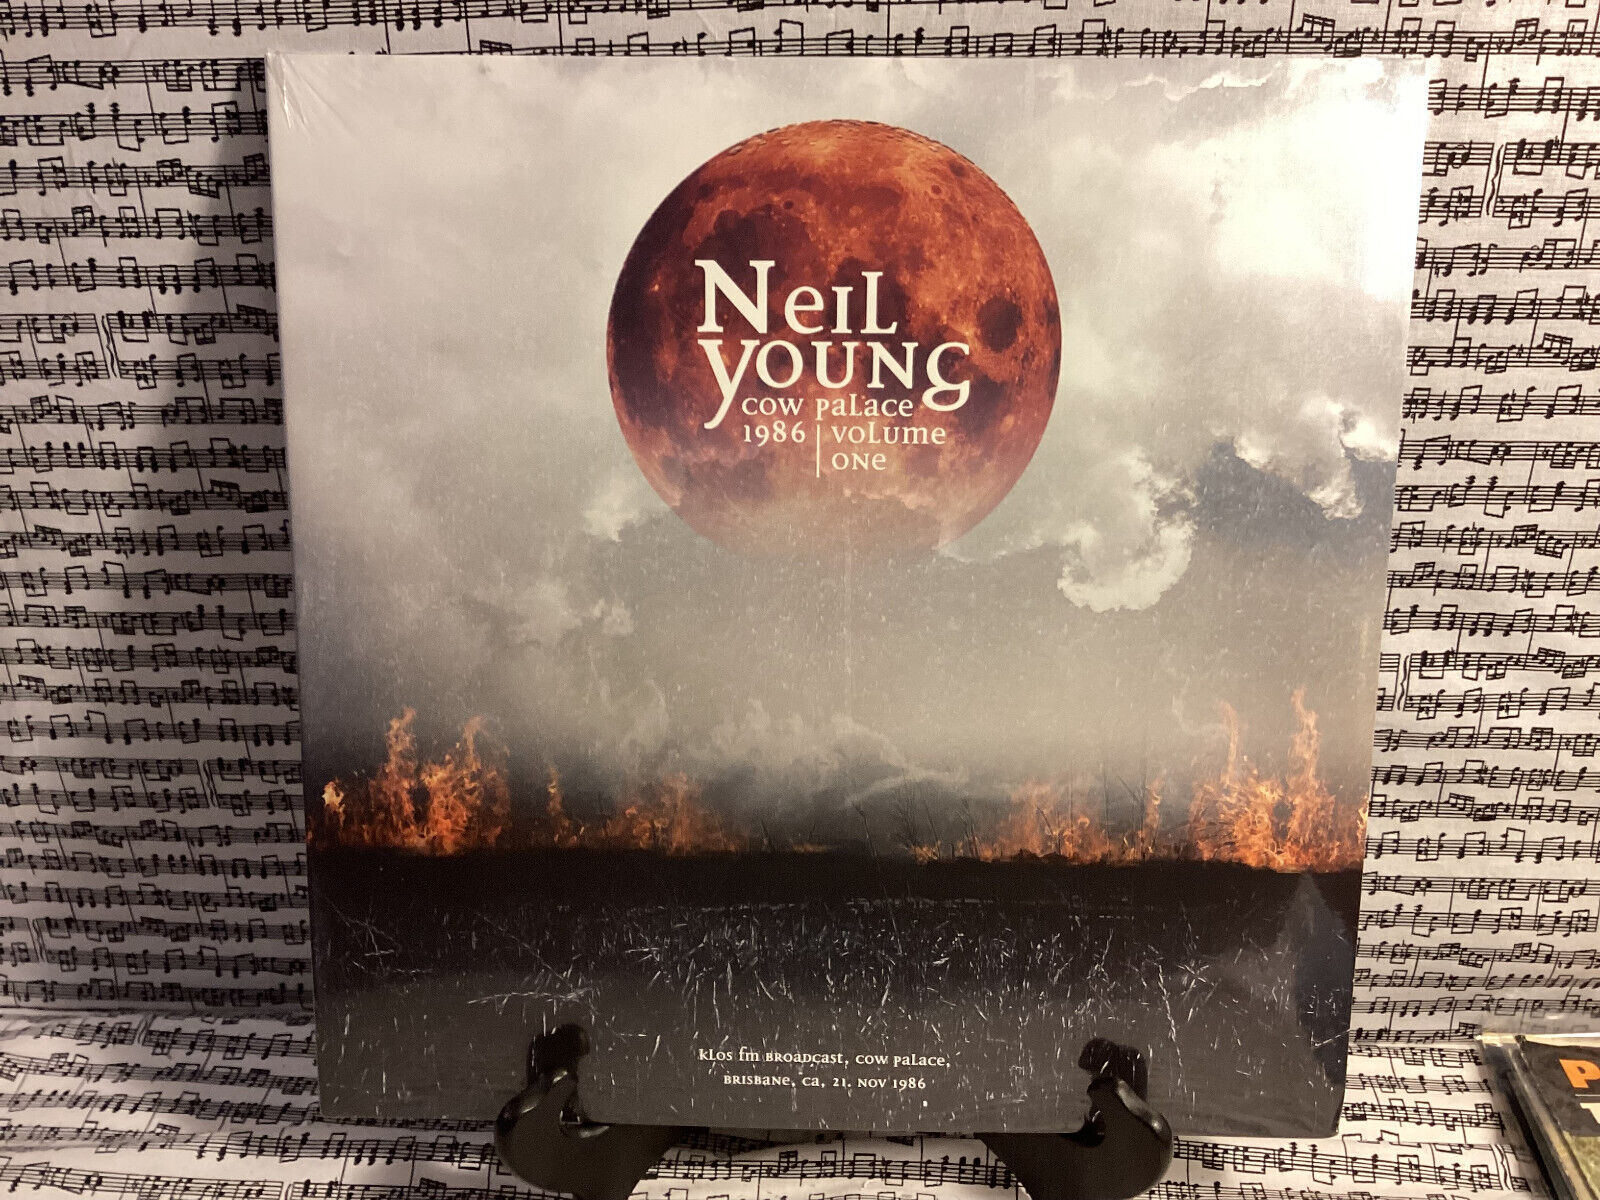 NEIL YOUNG-COW PALACE 1986 -klos fm broadcast volume one Mint Sealed 2 disc set